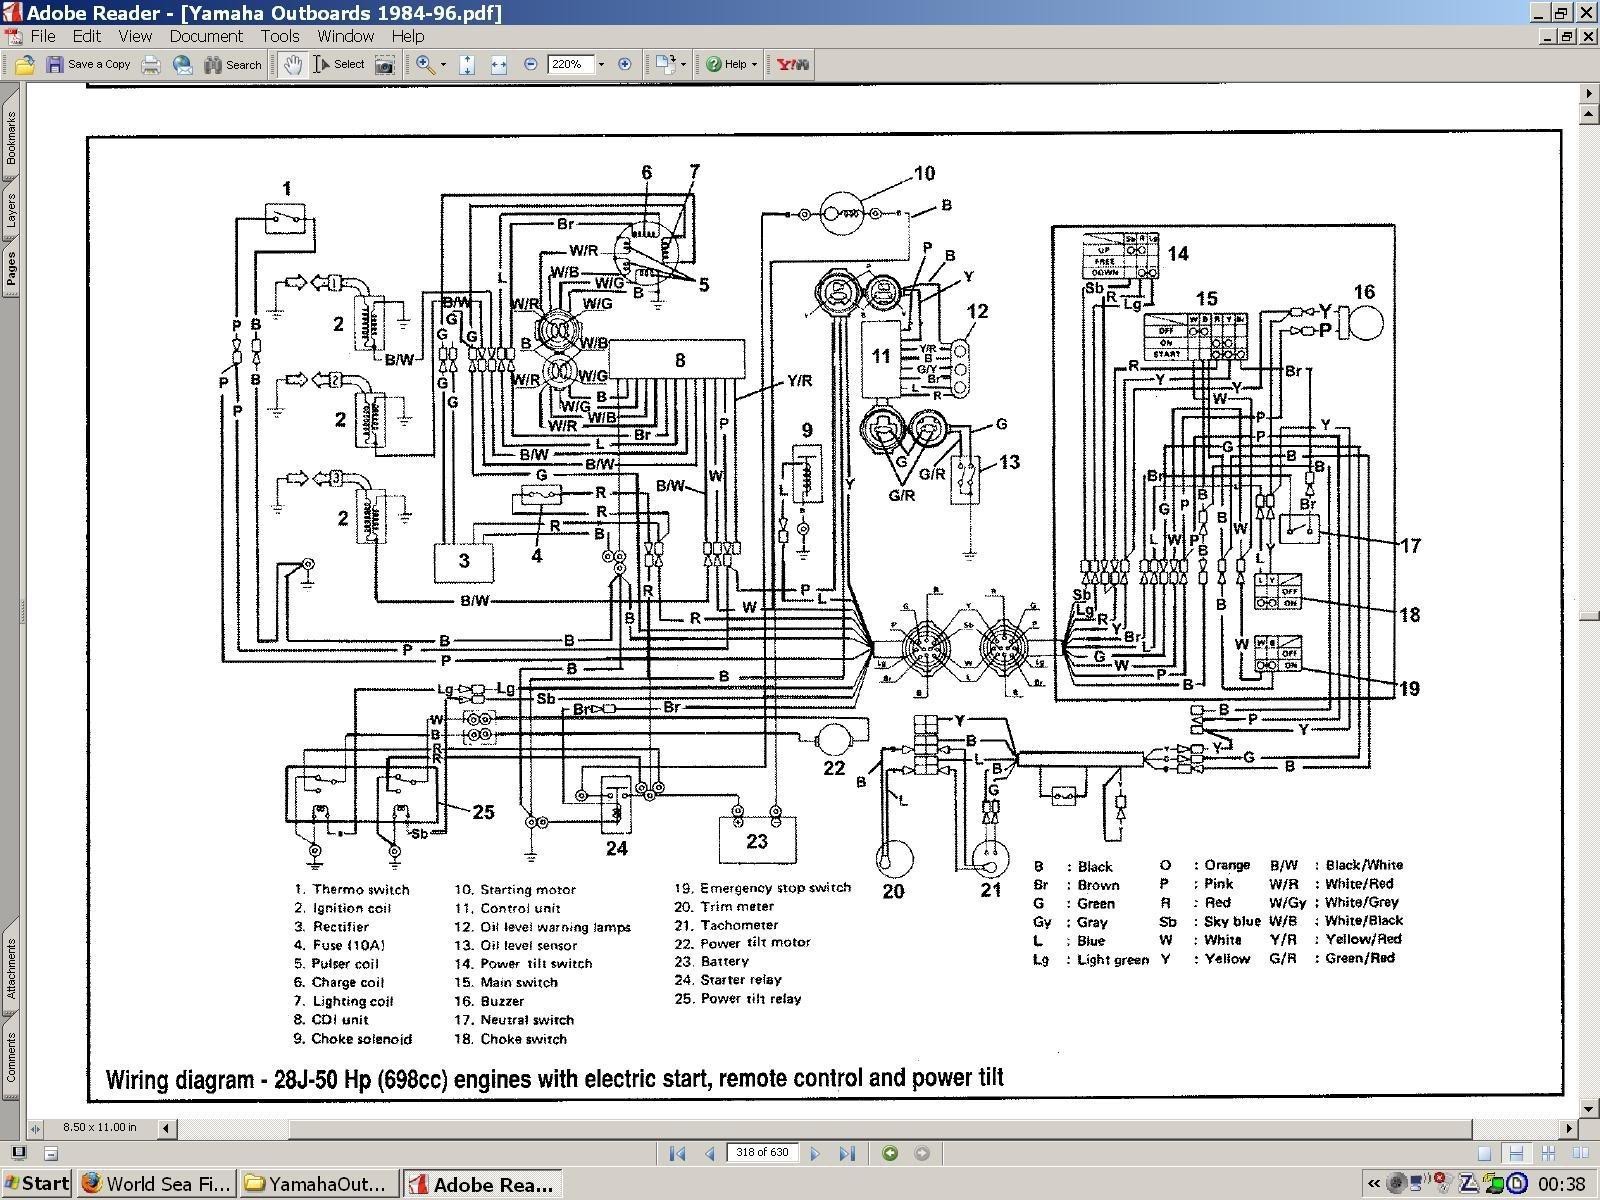 Wiring Diagram Yamaha Outboard Ignition Switch New Johnson Outboard Wiring Diagram Pdf New Johnson Outboard Wiring